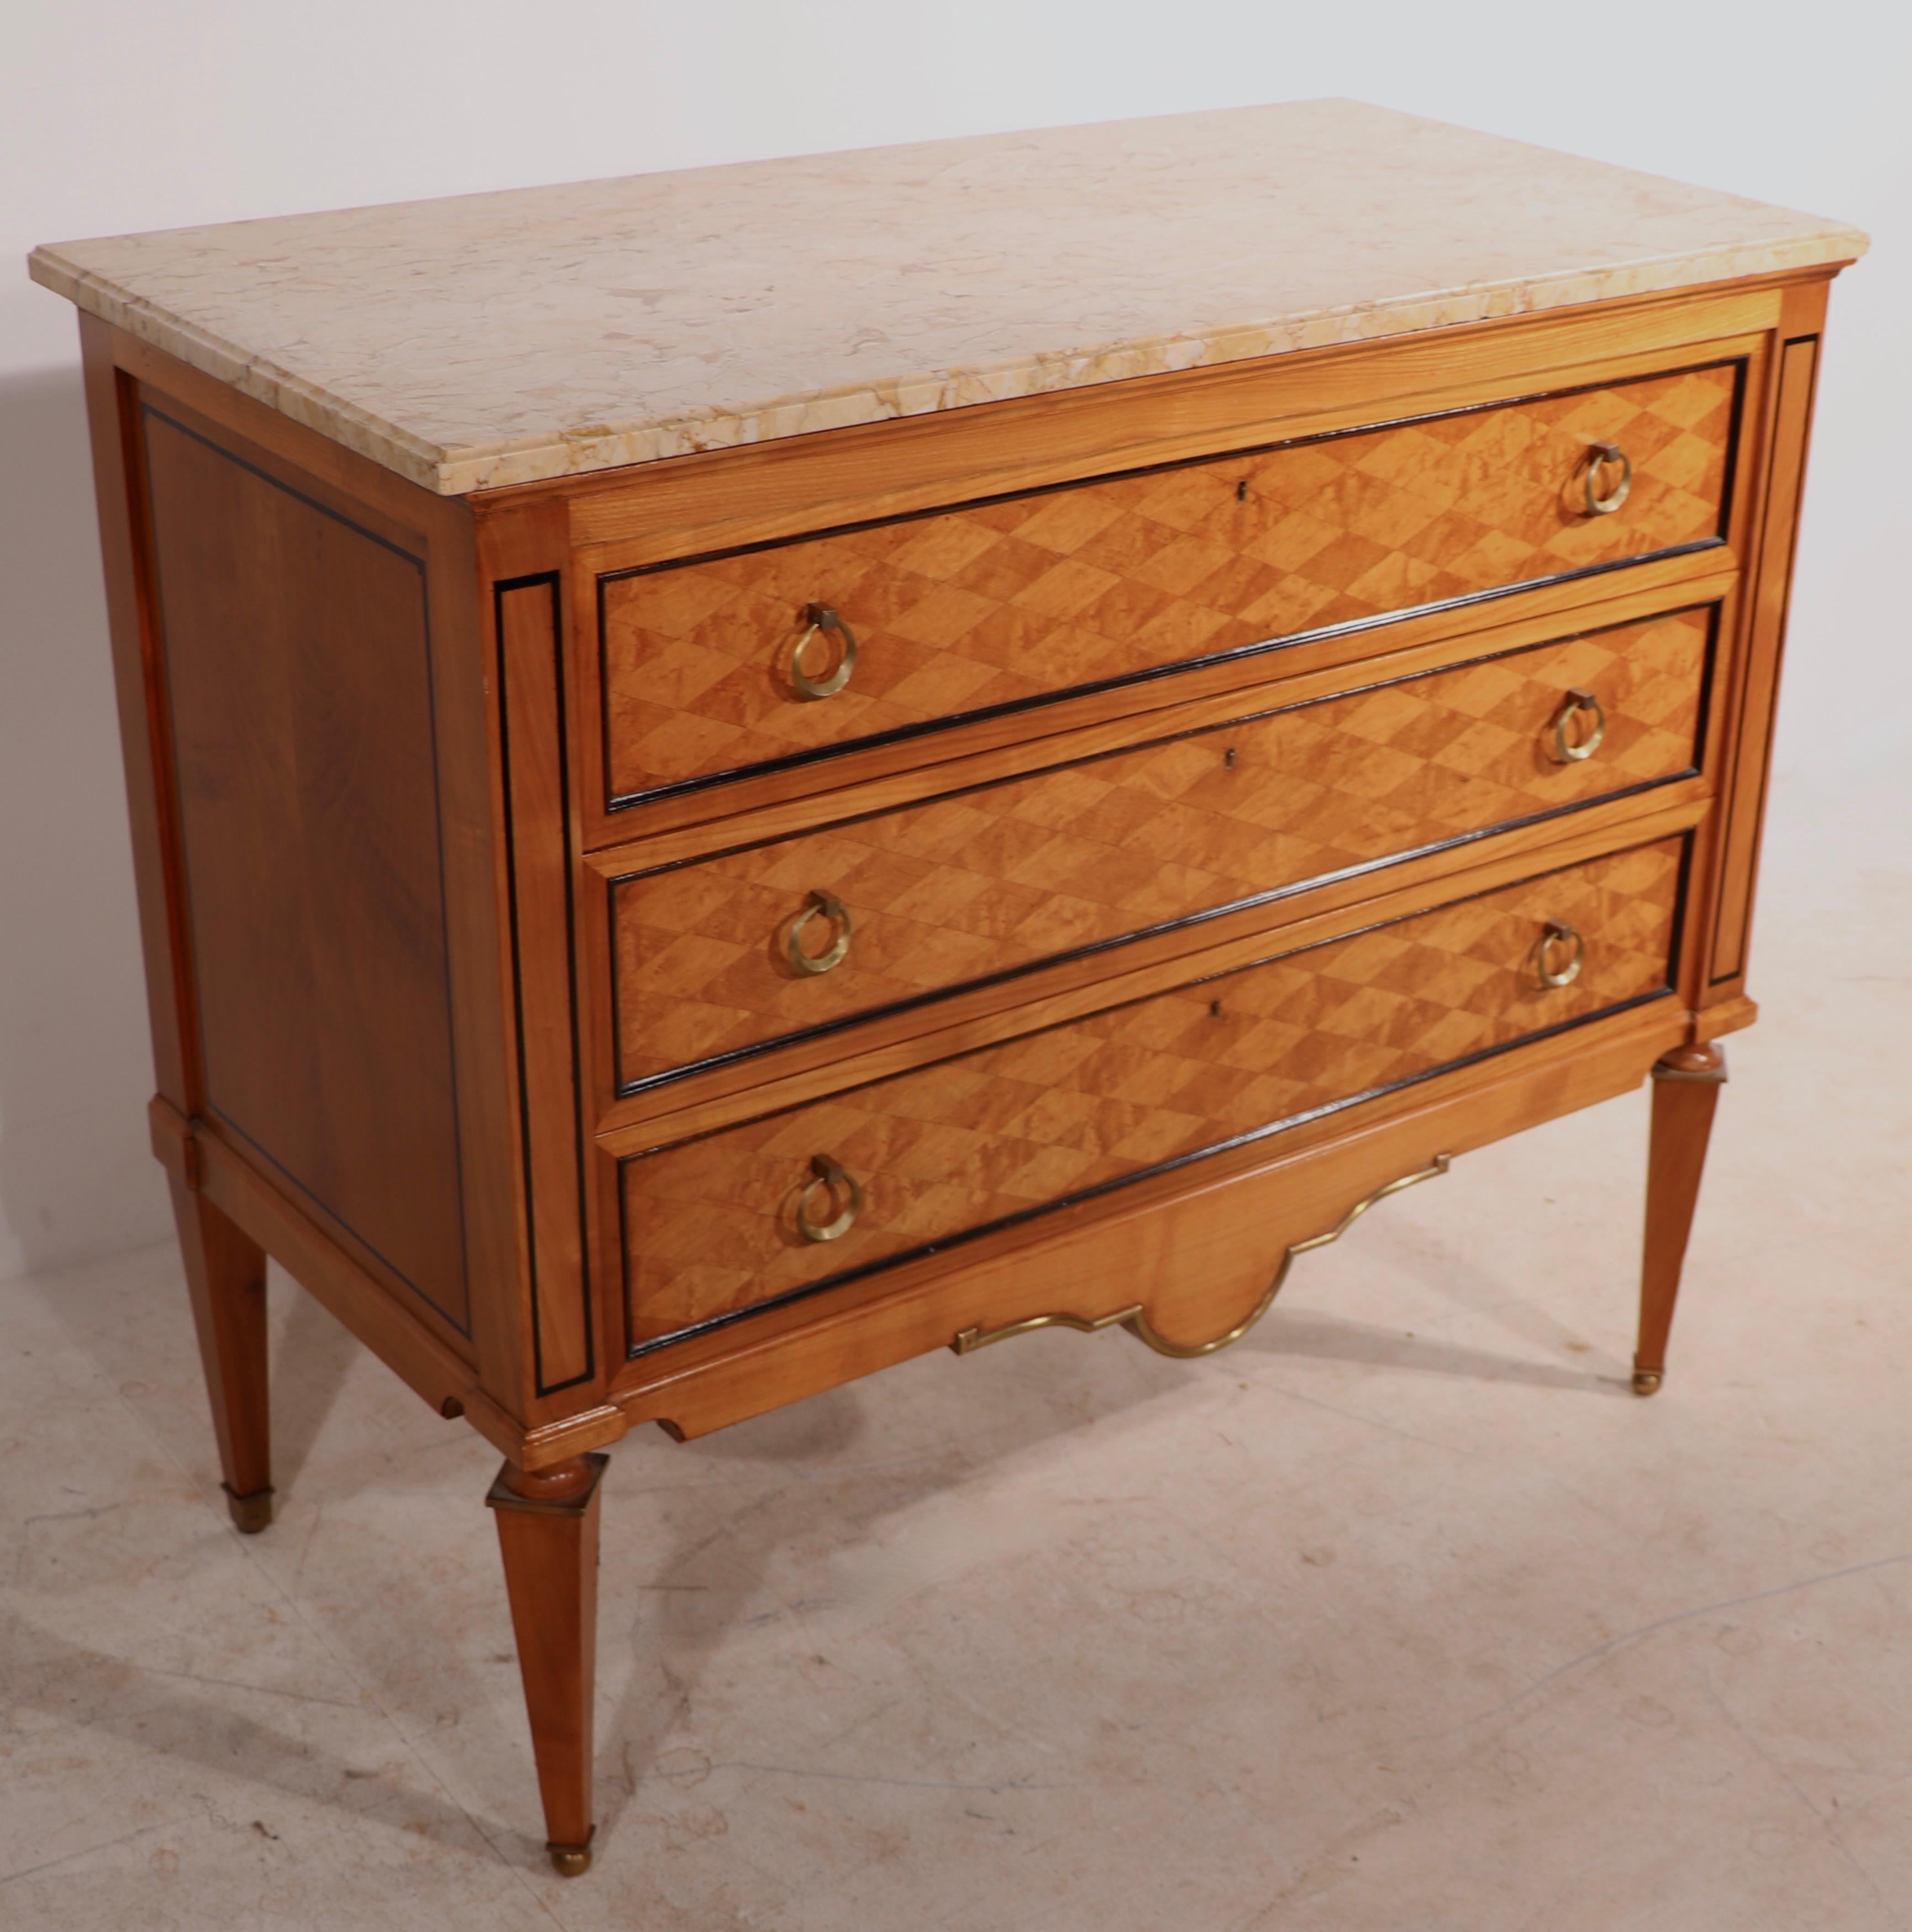 20th Century Continental Satinwood Brass and Marble Commode ca. 20th C probably Italian Made For Sale